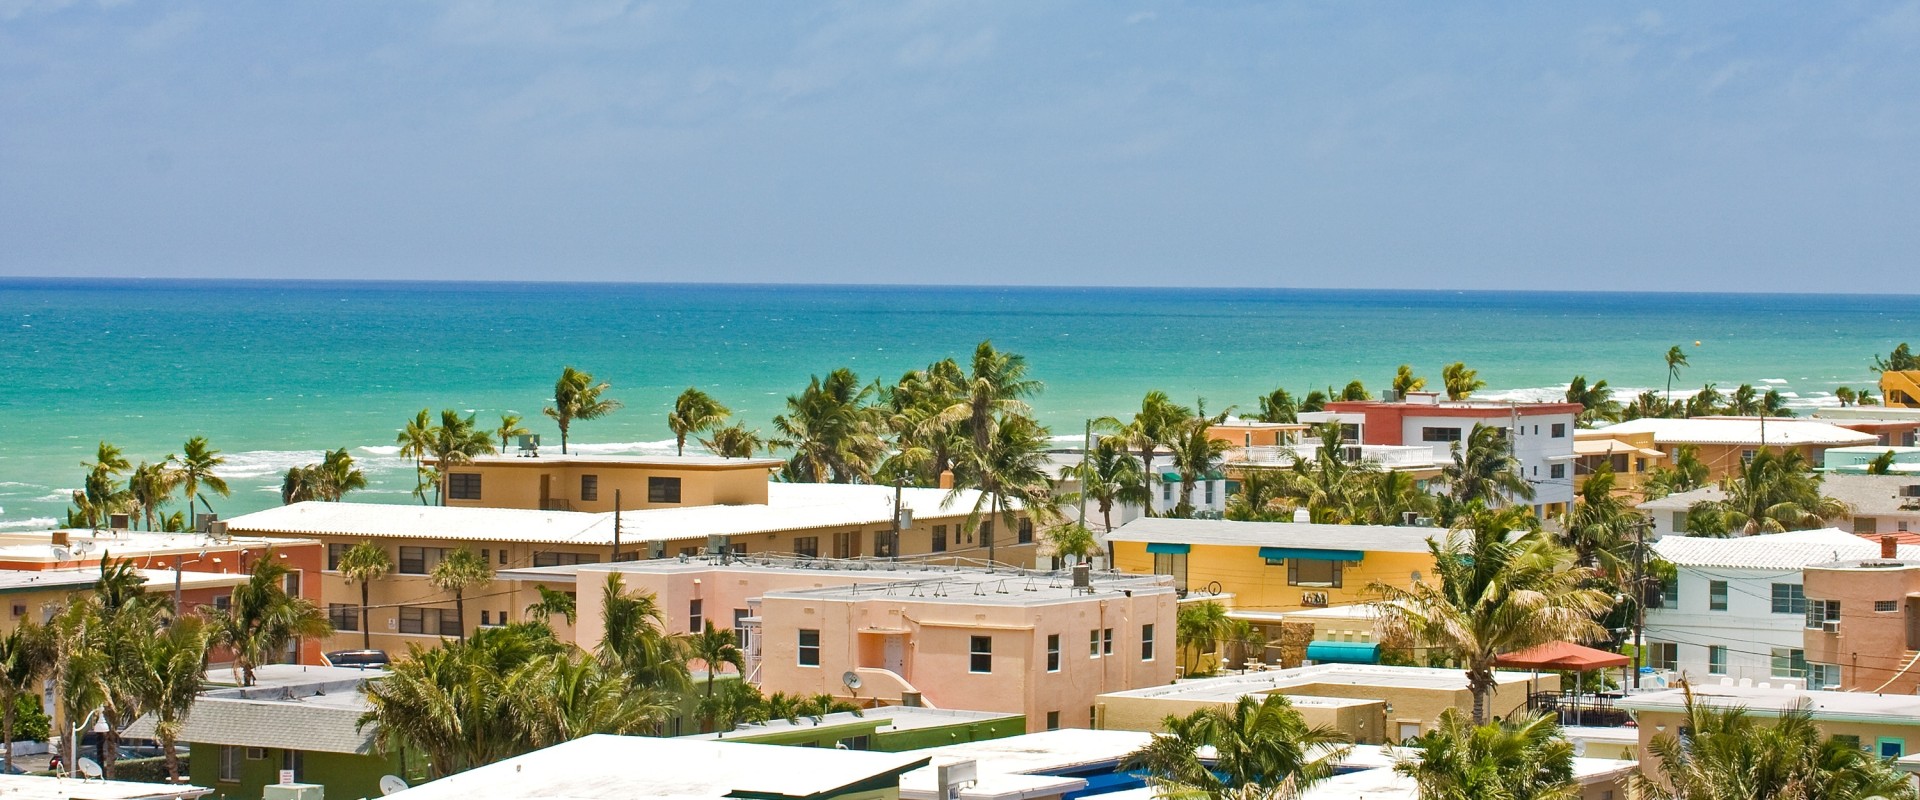 Experience the Best of Hollywood, FL with These Top Vacation Rentals